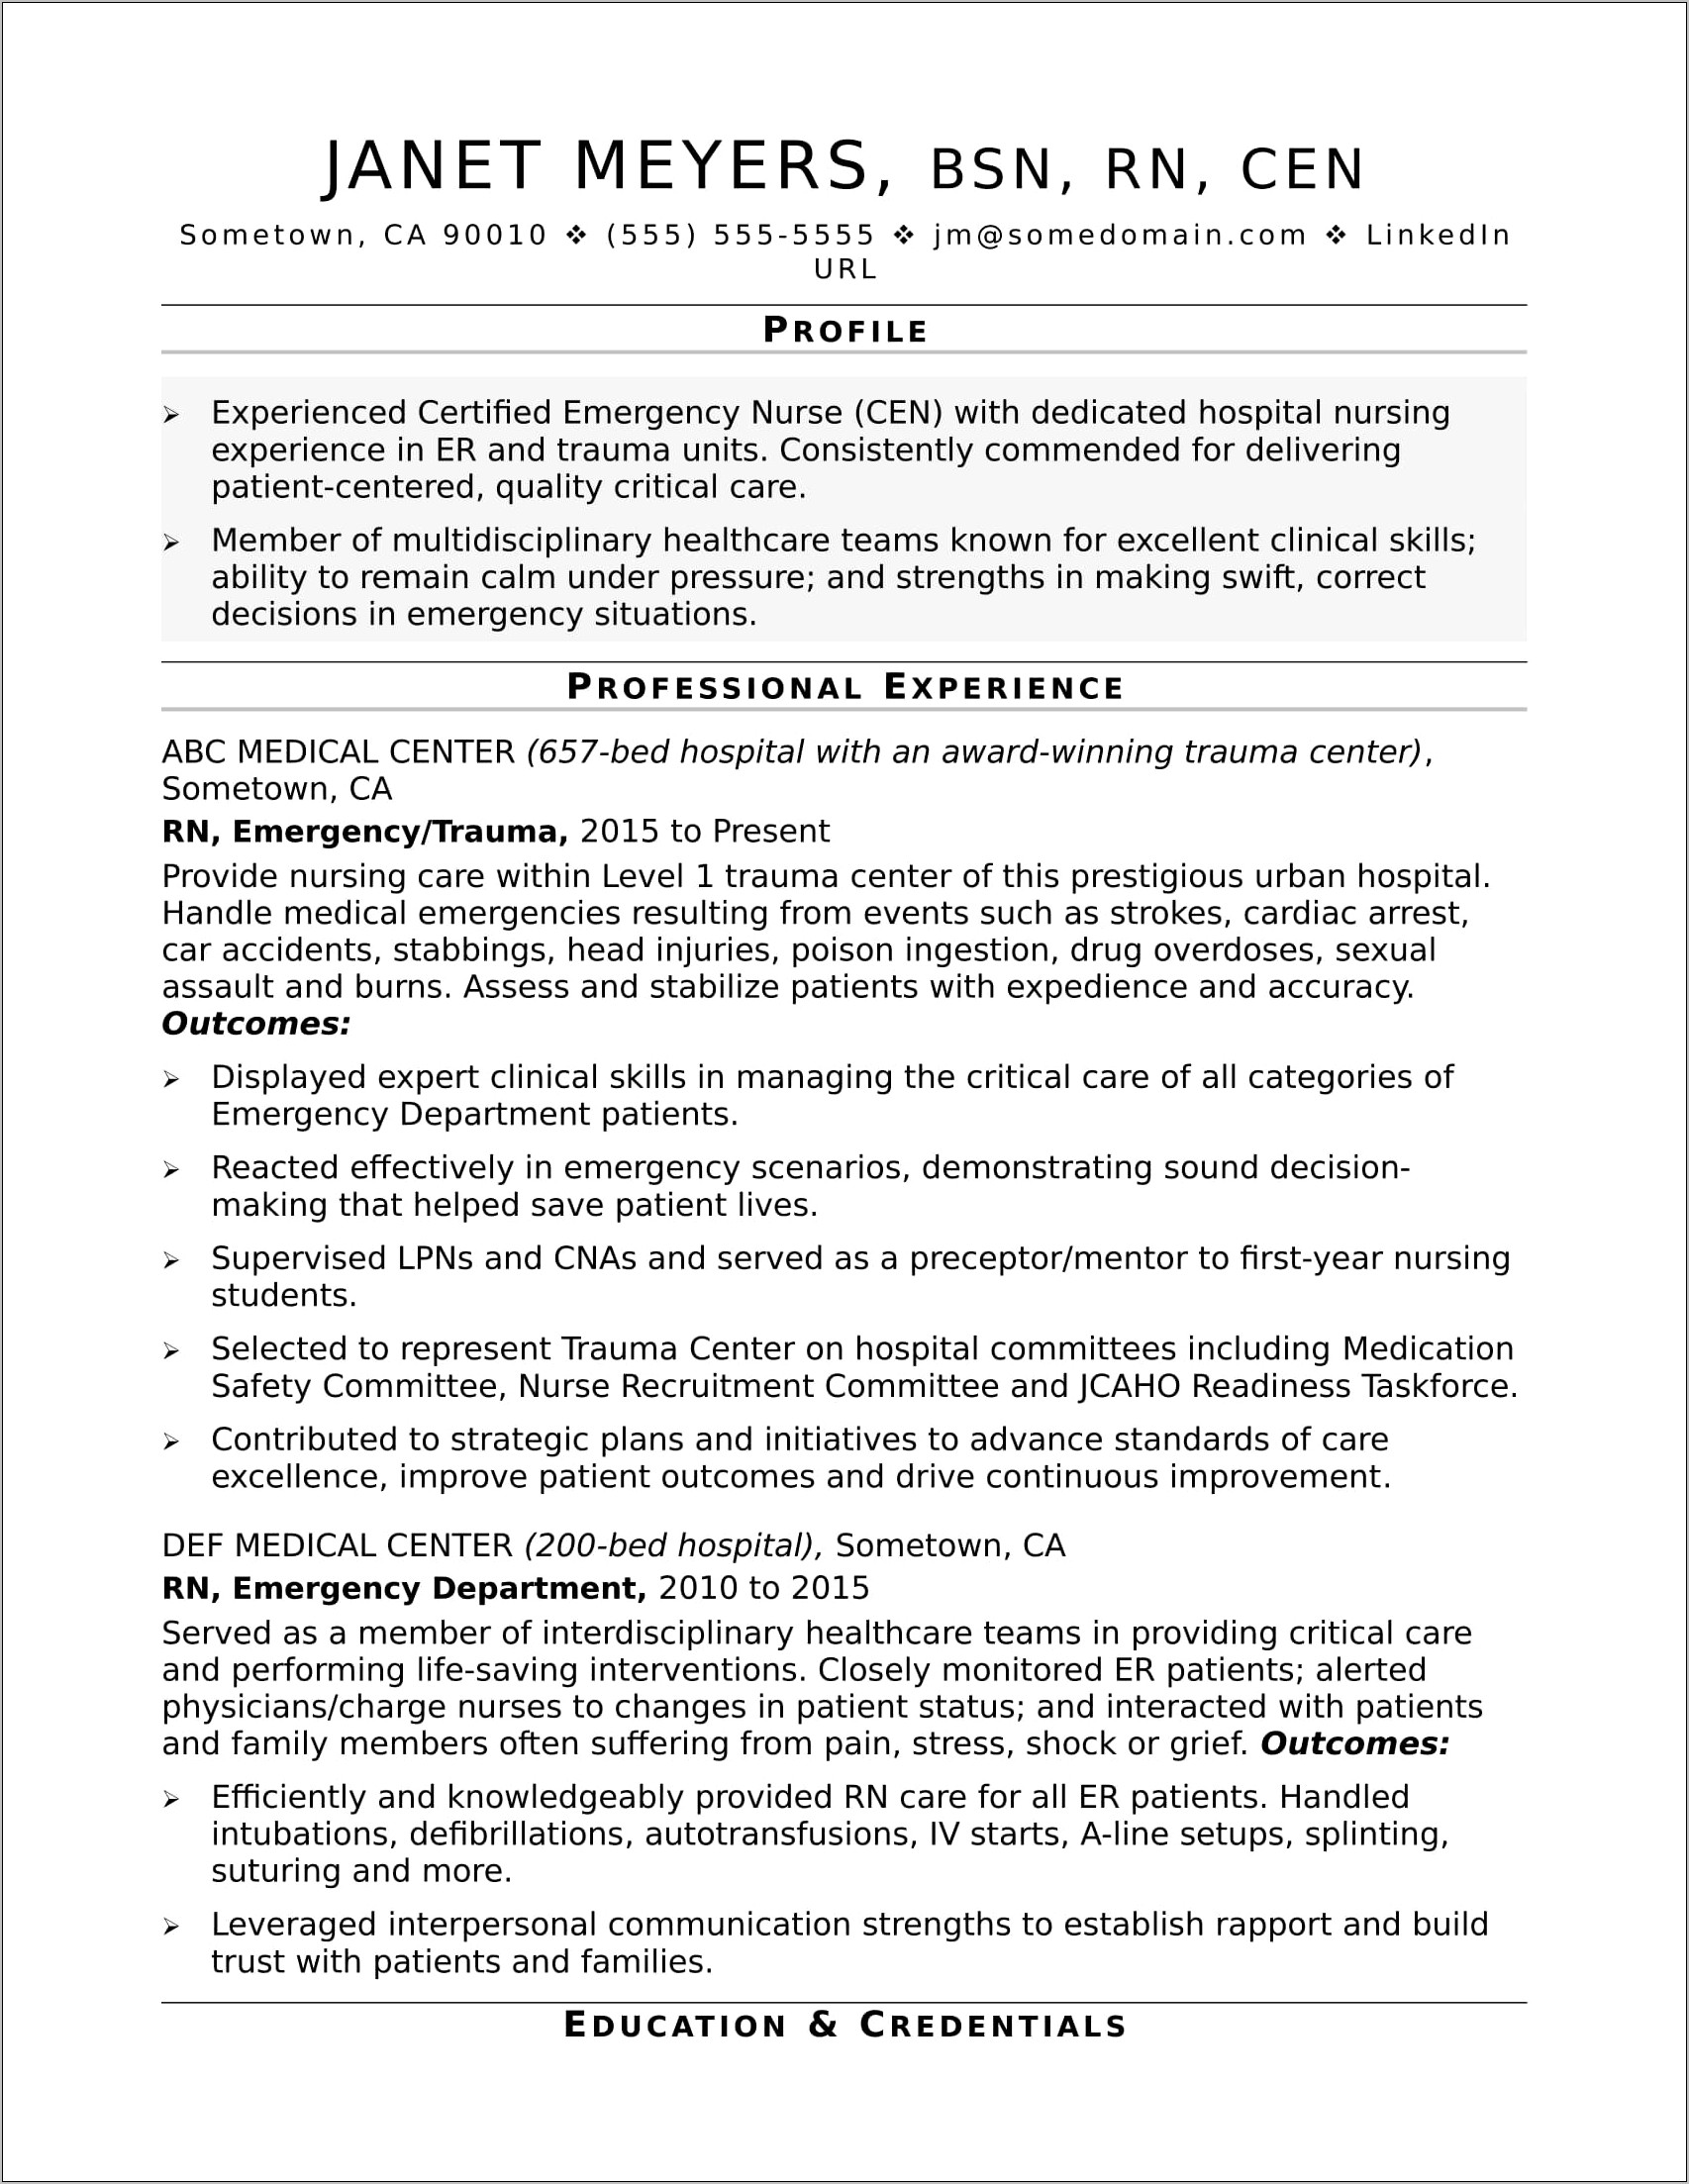 Sample Resume For Nurses With 1 Year Experience